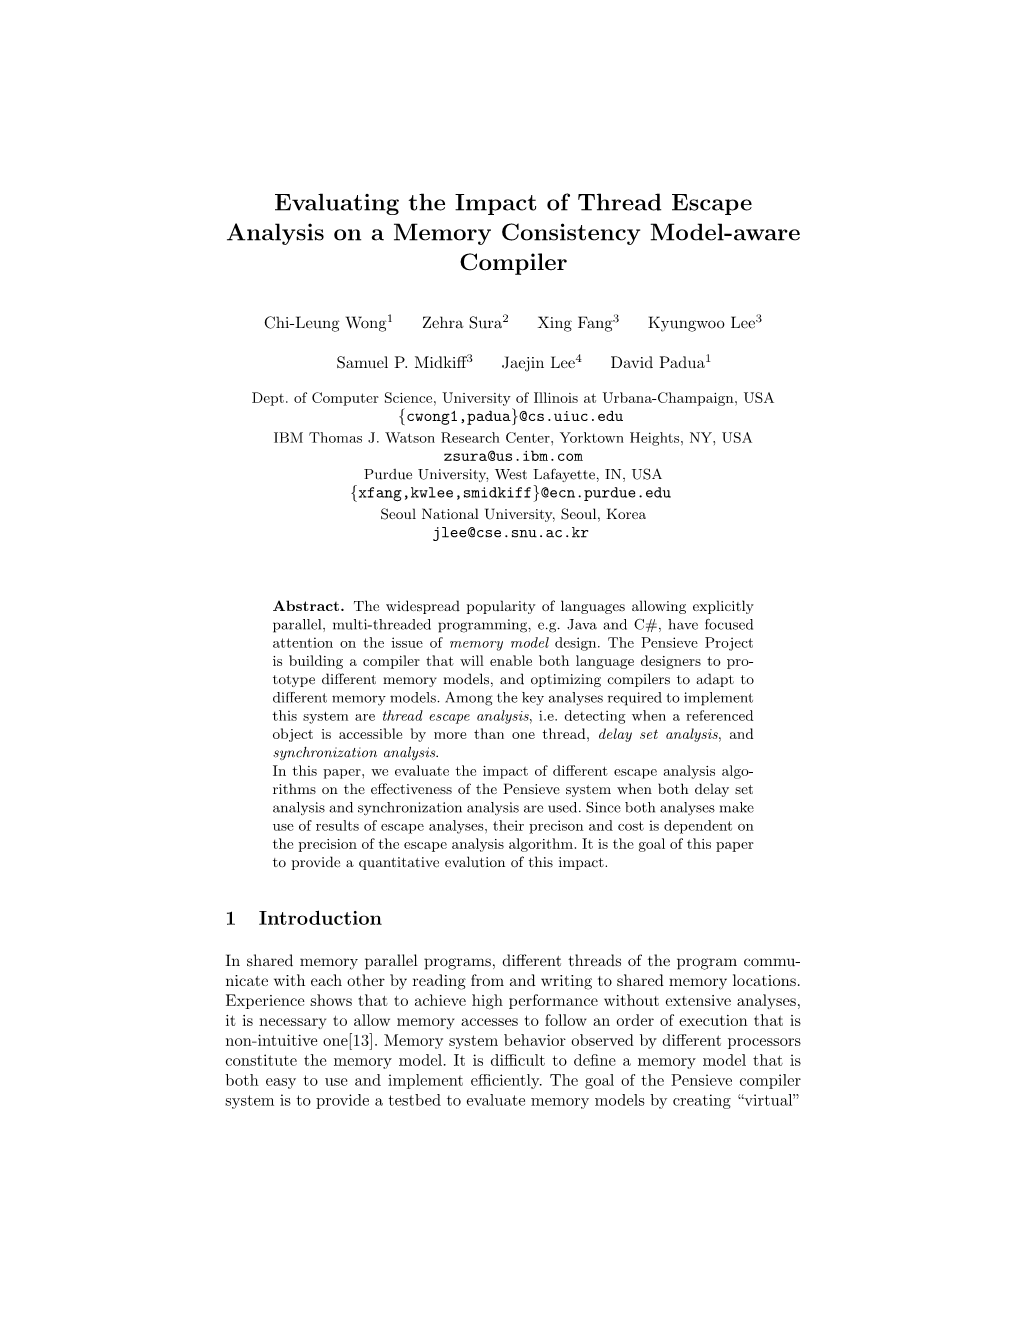 Evaluating the Impact of Thread Escape Analysis on a Memory Consistency Model-Aware Compiler